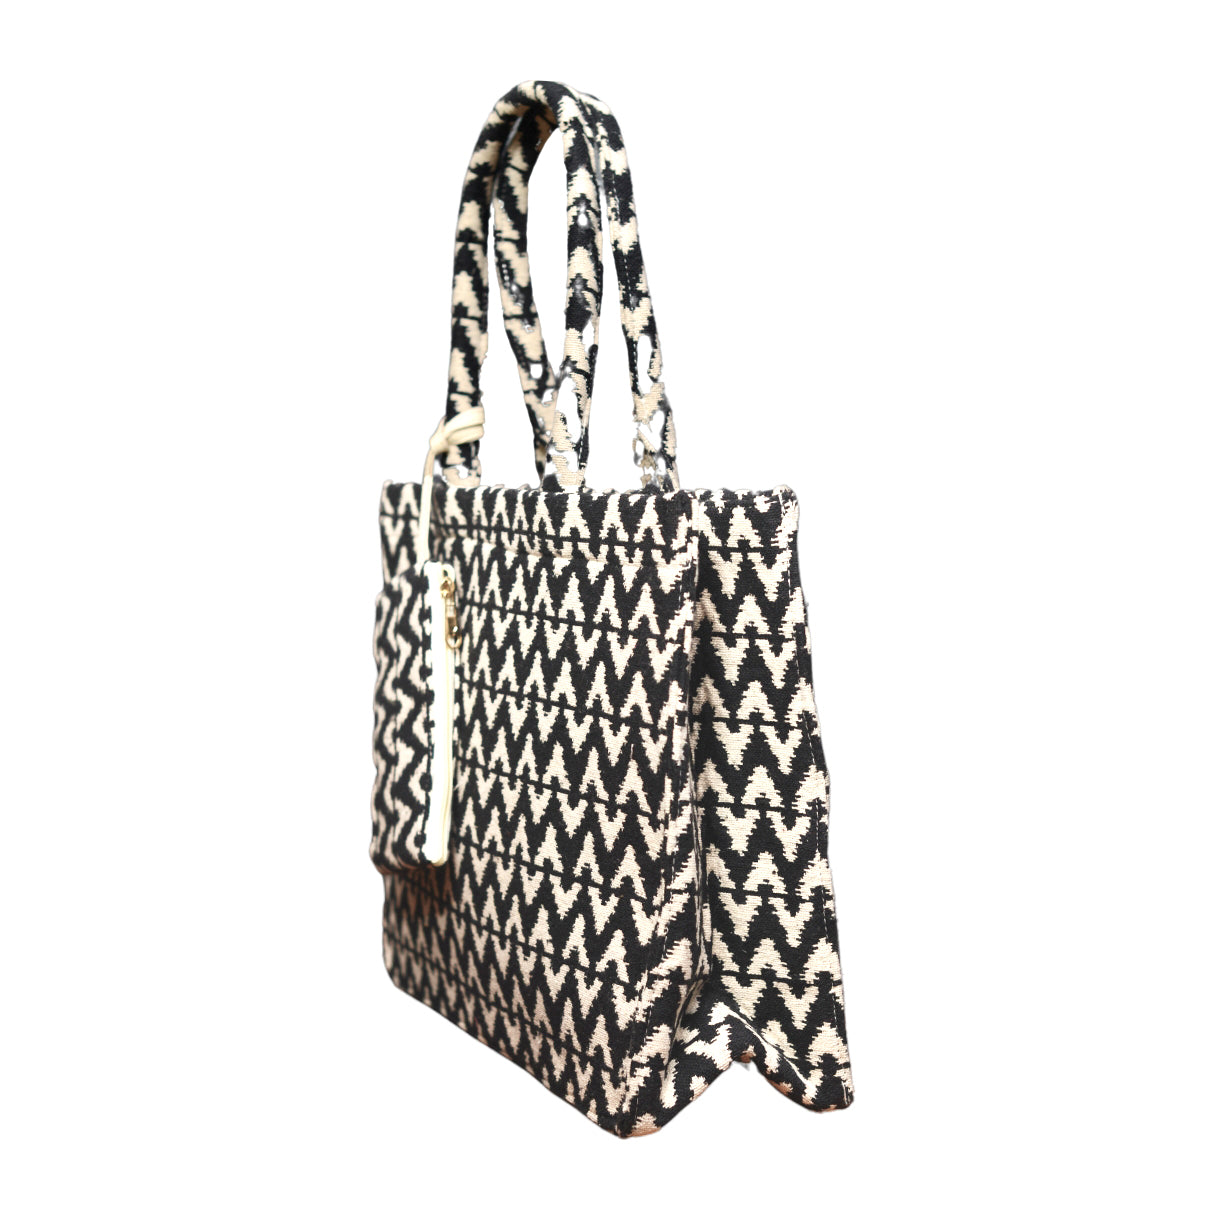 Black And White Zigzag Style Tote bag